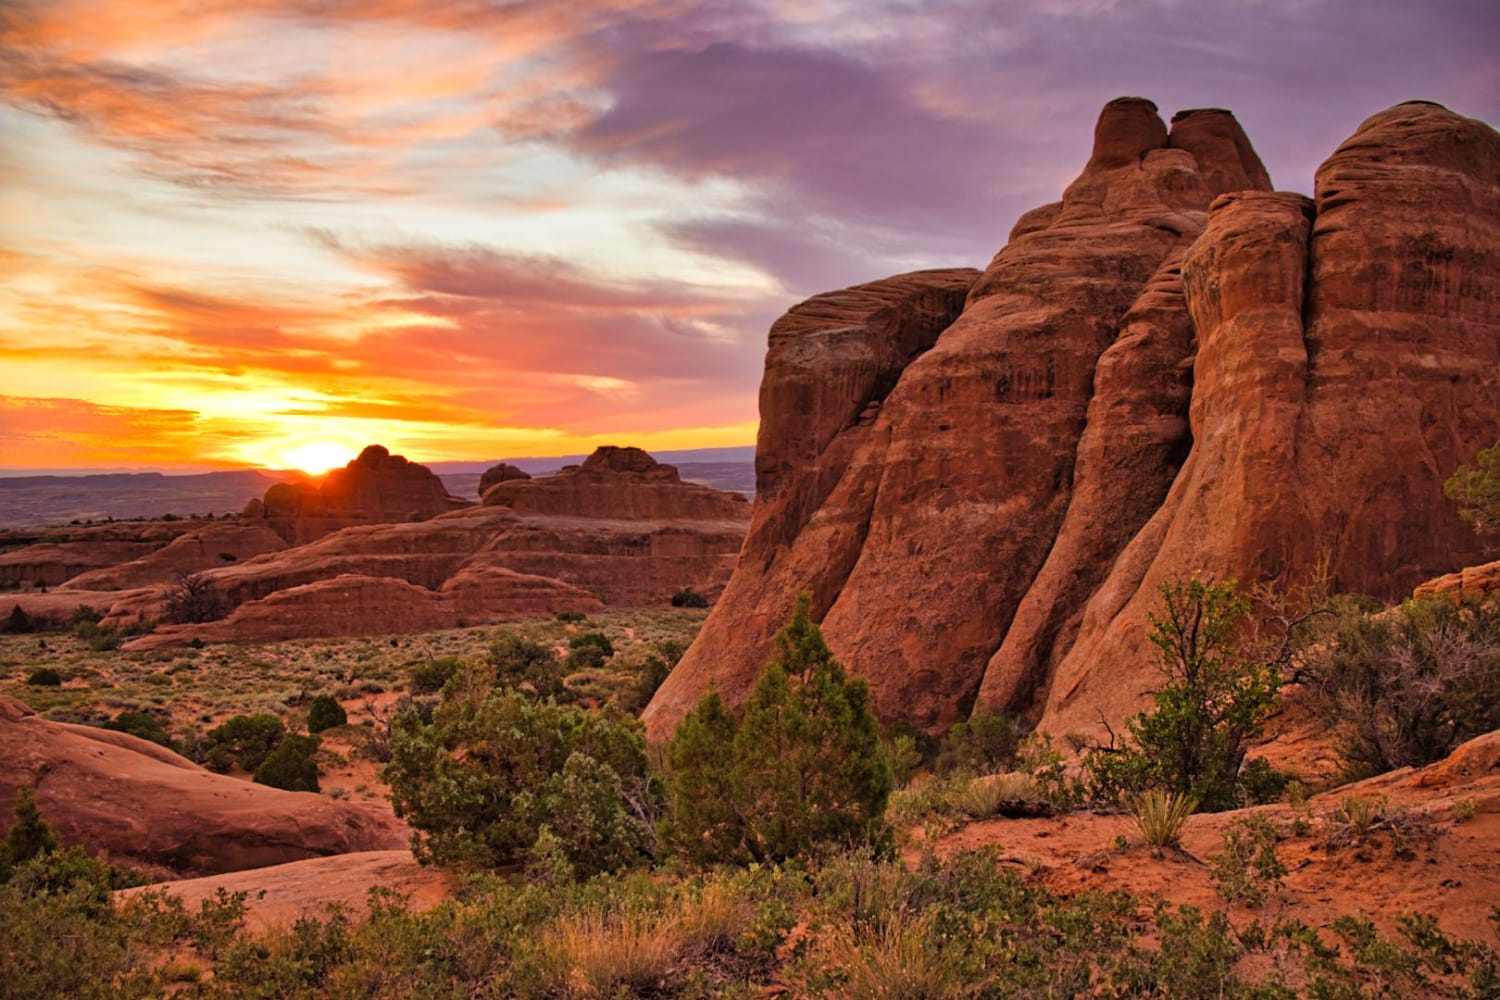 Summer at Arches National Park: How to Really Beat the Heat and Crowds